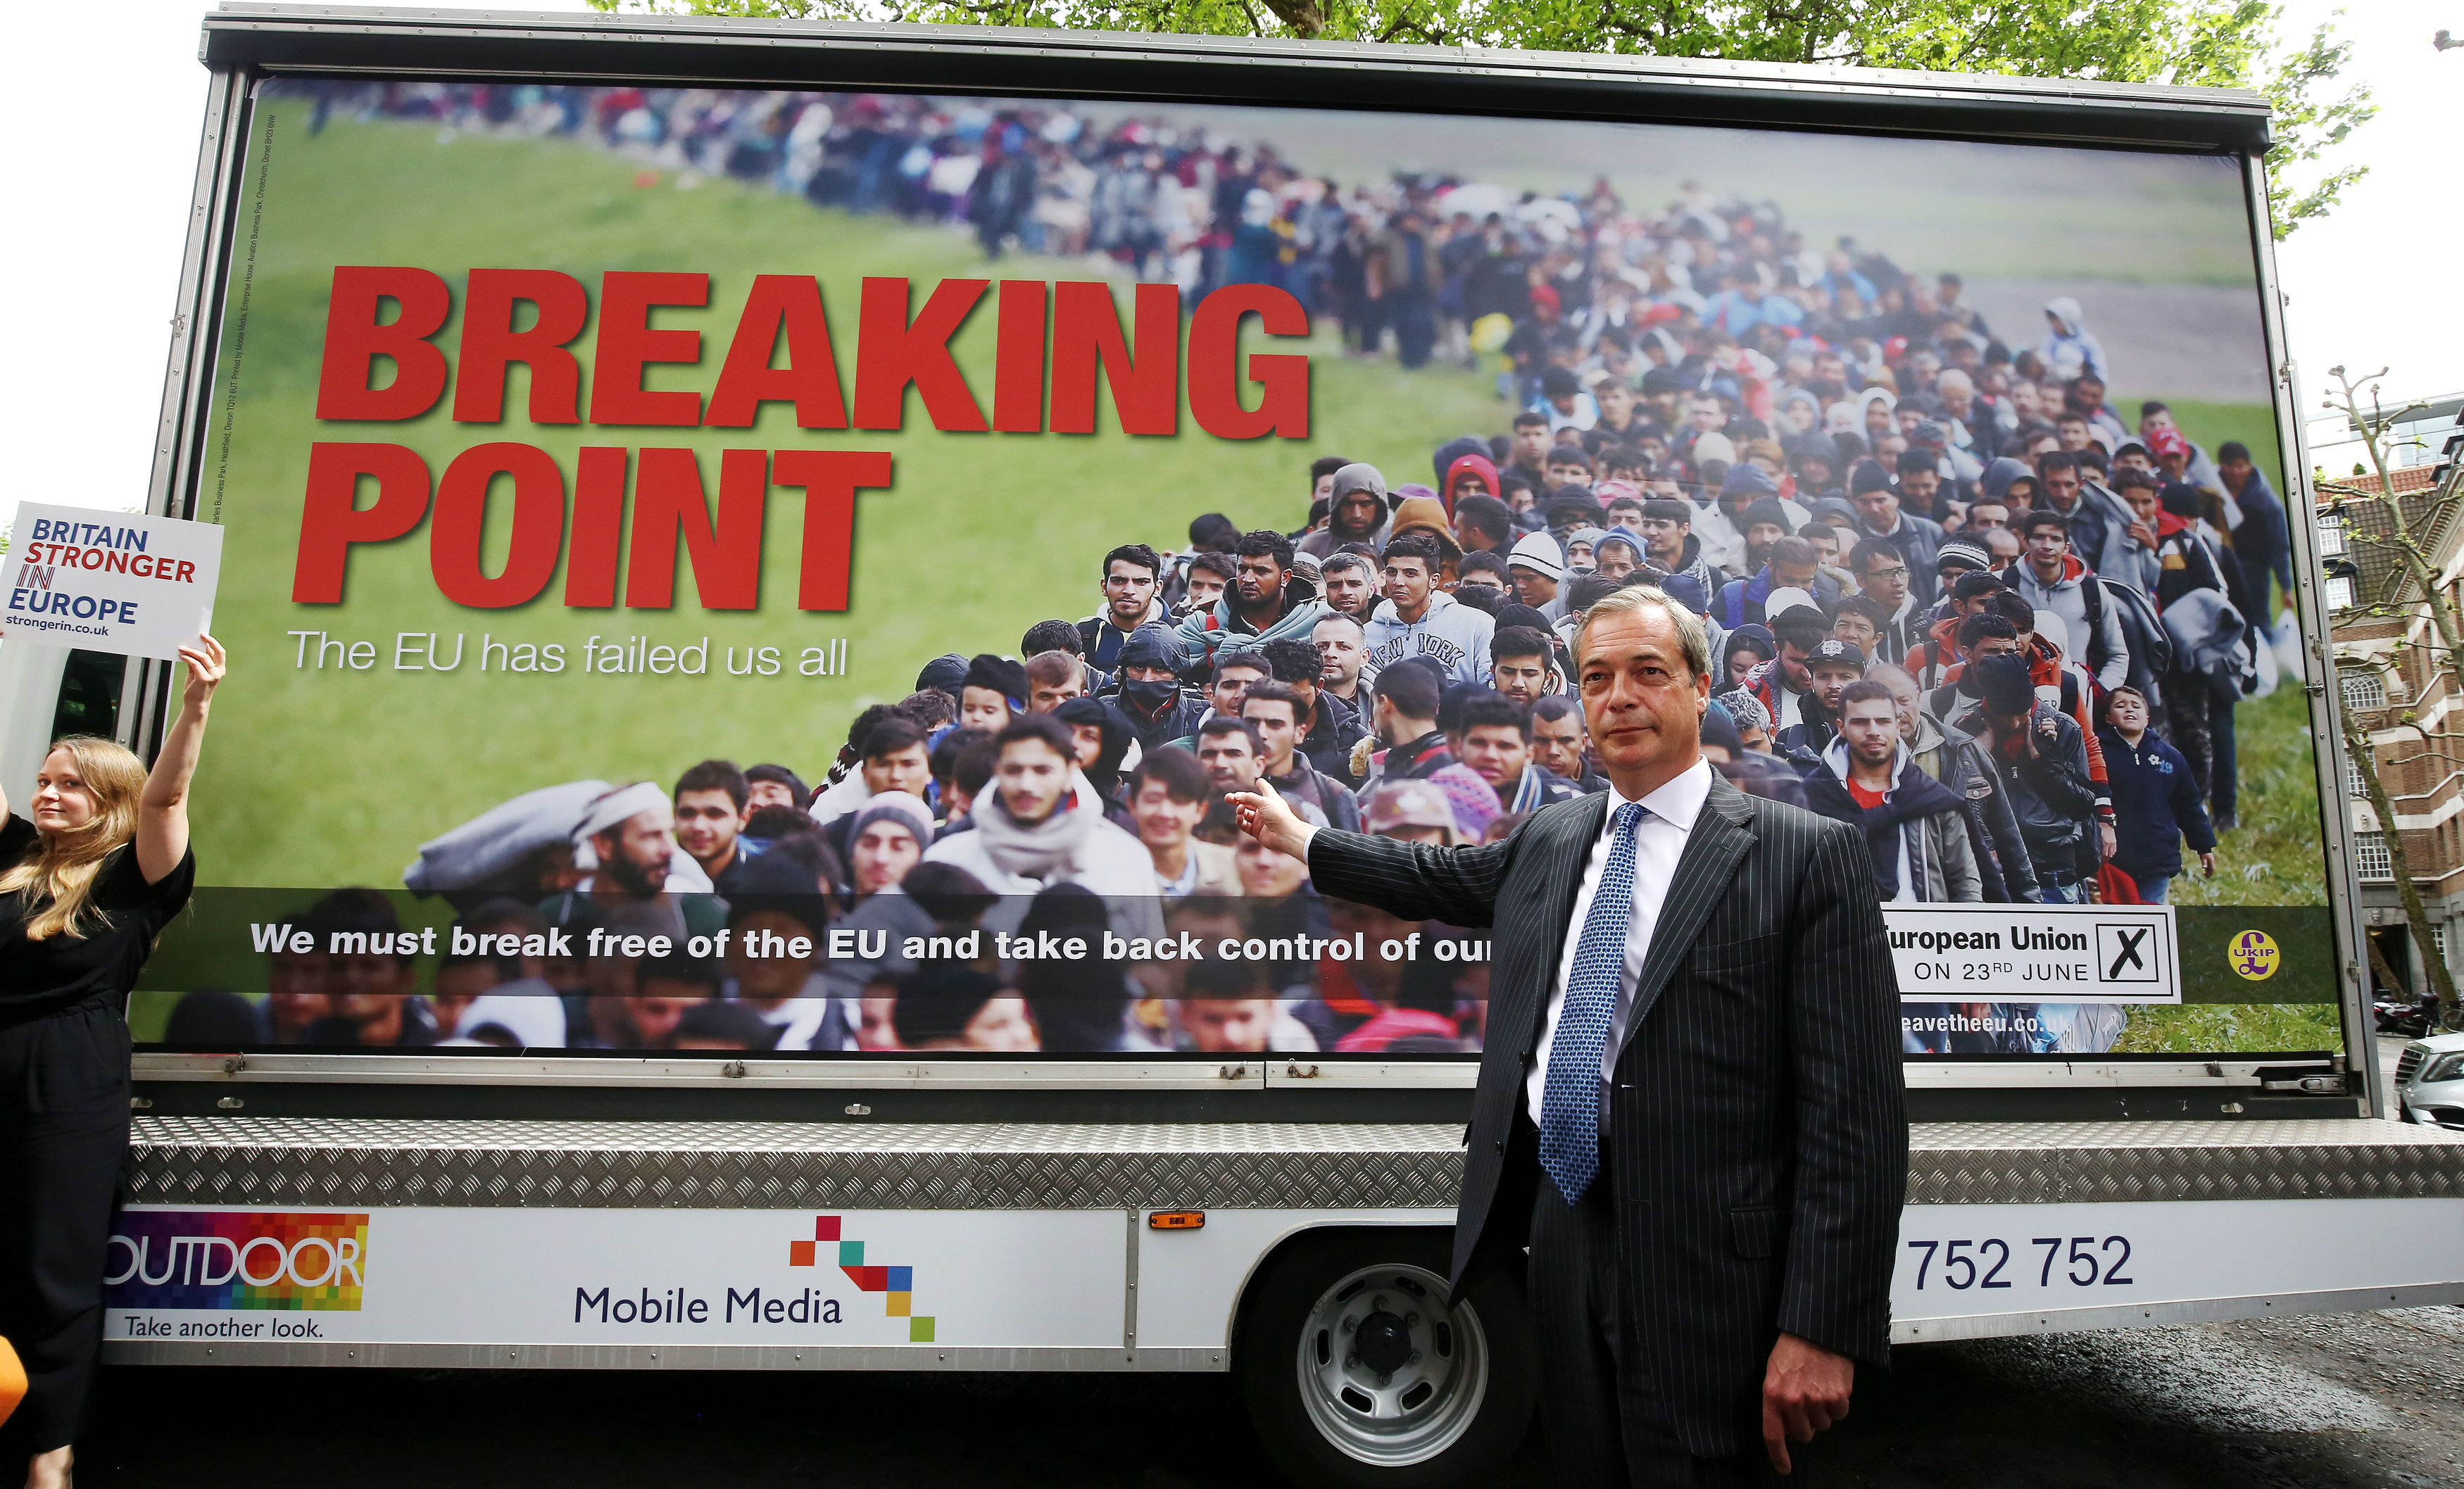 Ukip leader Nigel Farage and his 'breaking point' poster.